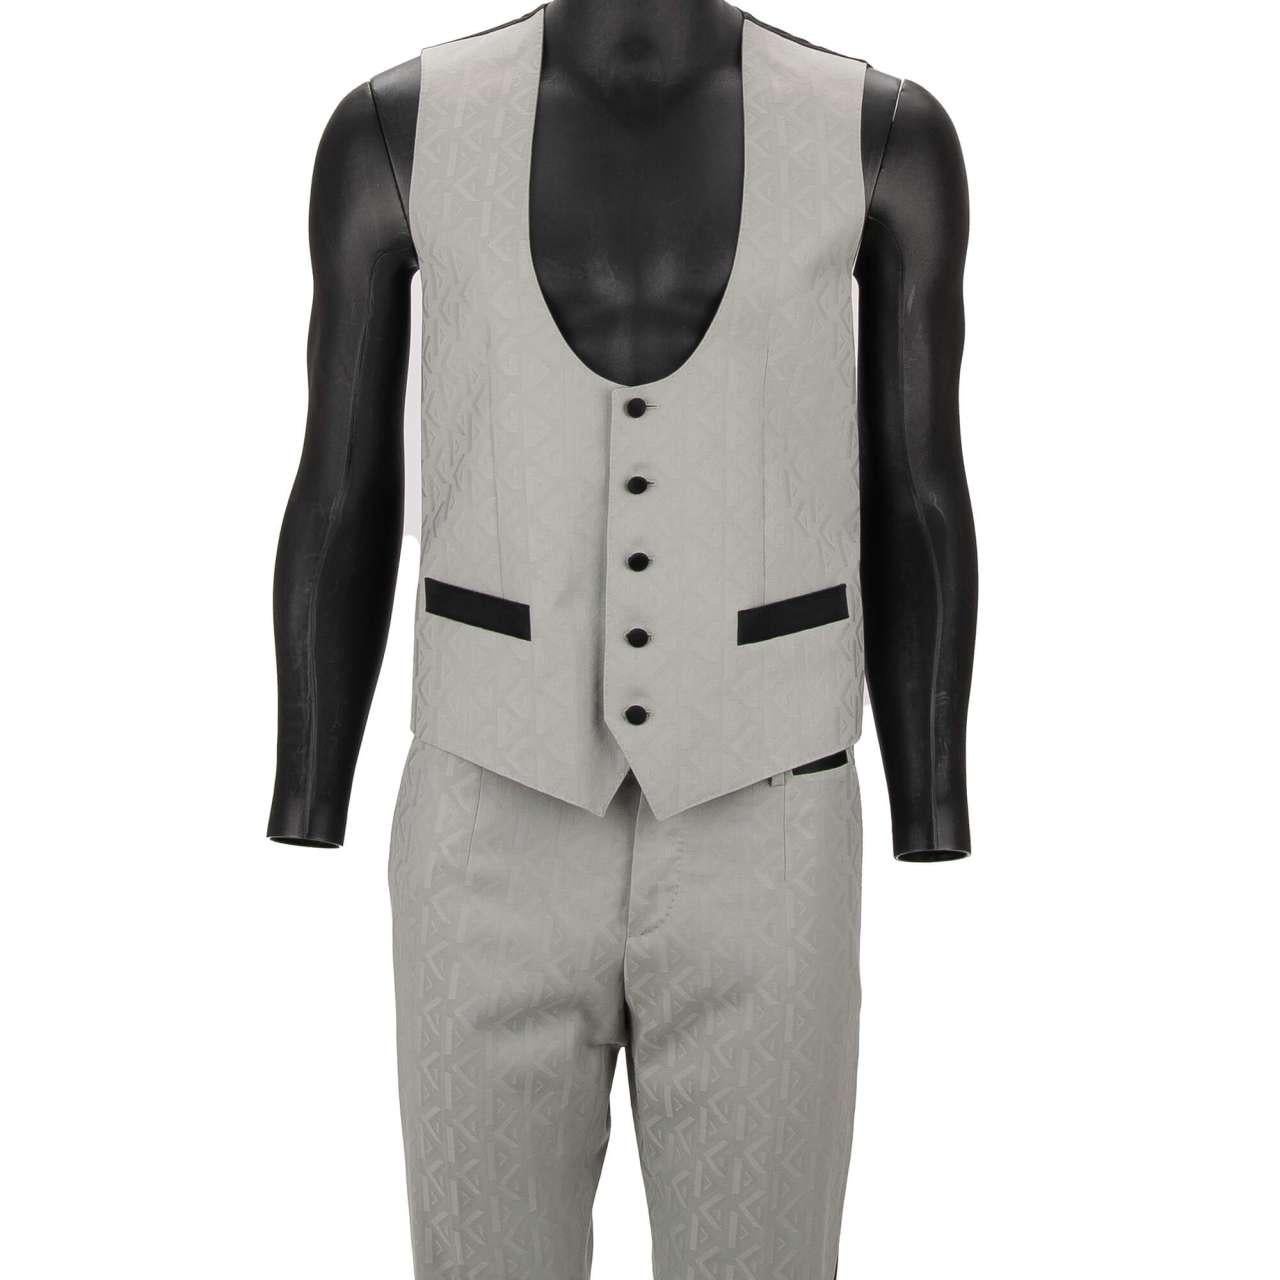 - Virgin wool 3 piece suit, jacket, waistcoat, pants with shawl silk lapel in gray and black by DOLCE & GABBANA - MARTINI Model - RUNWAY - Dolce & Gabbana Fashion Show - New with tag - Former RRP: EUR 3,350 - MADE in ITALY - Slim Fit - Model: